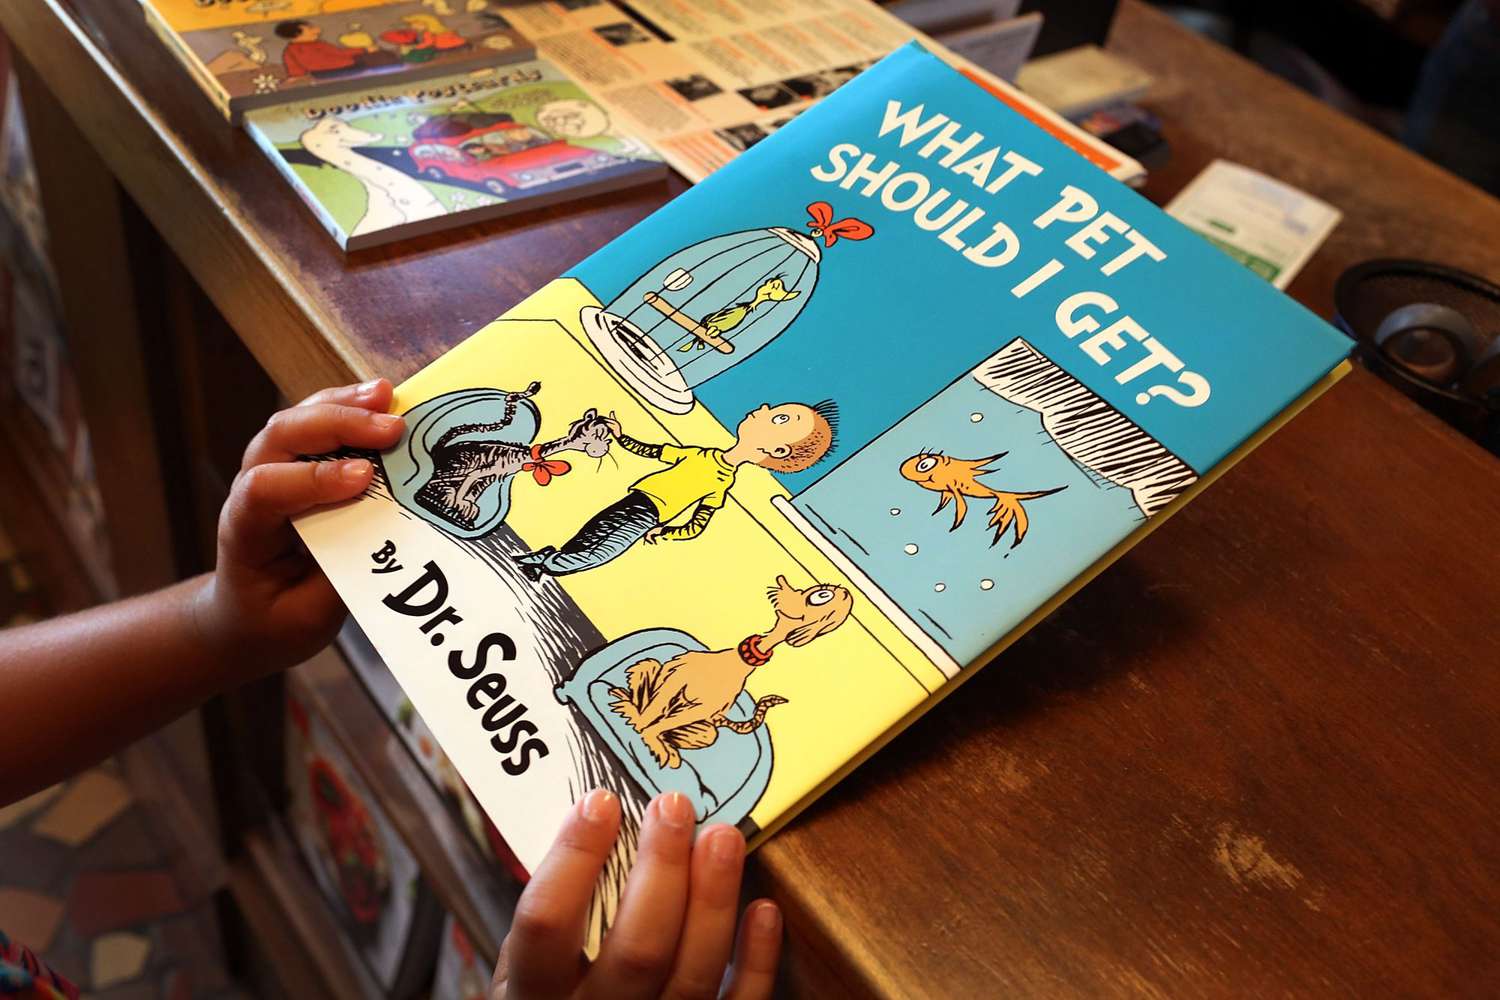 An image of a child holding a Dr. Seuss book.